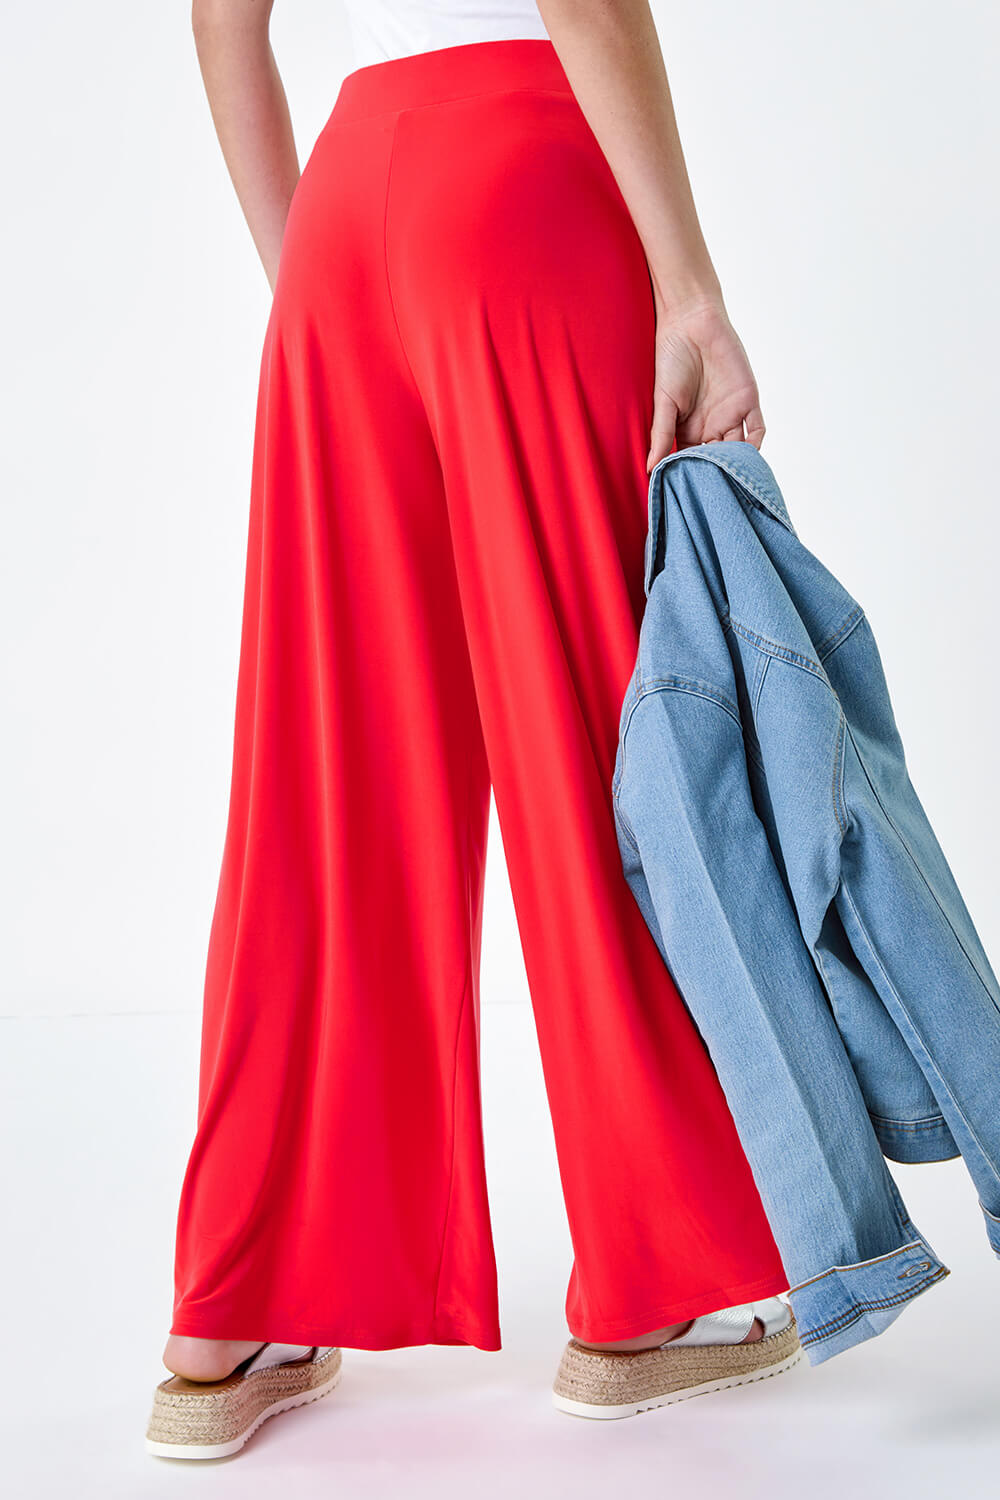 ORANGE Wide Leg Stretch Trousers, Image 3 of 5